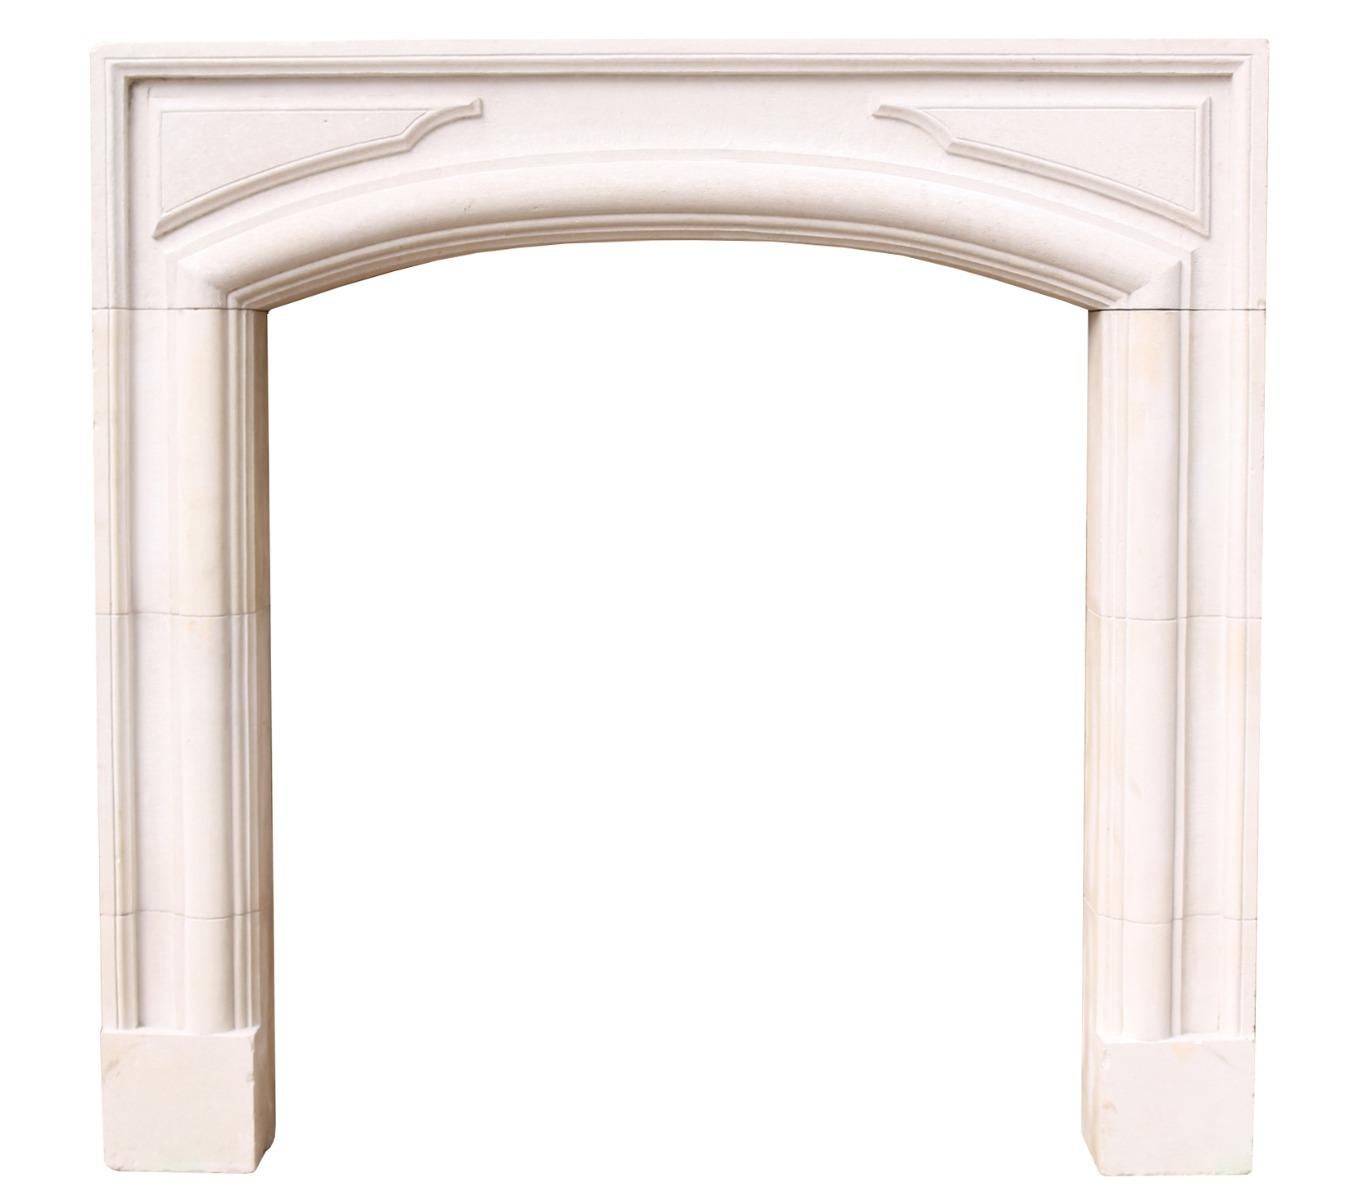 A reclaimed Georgian style fire surround with bolection moulding and arched panelled frieze.

Additional Dimensions:

Opening Height 96 cm

Opening Width 86 cm

Width between outside of legs 119 cm.